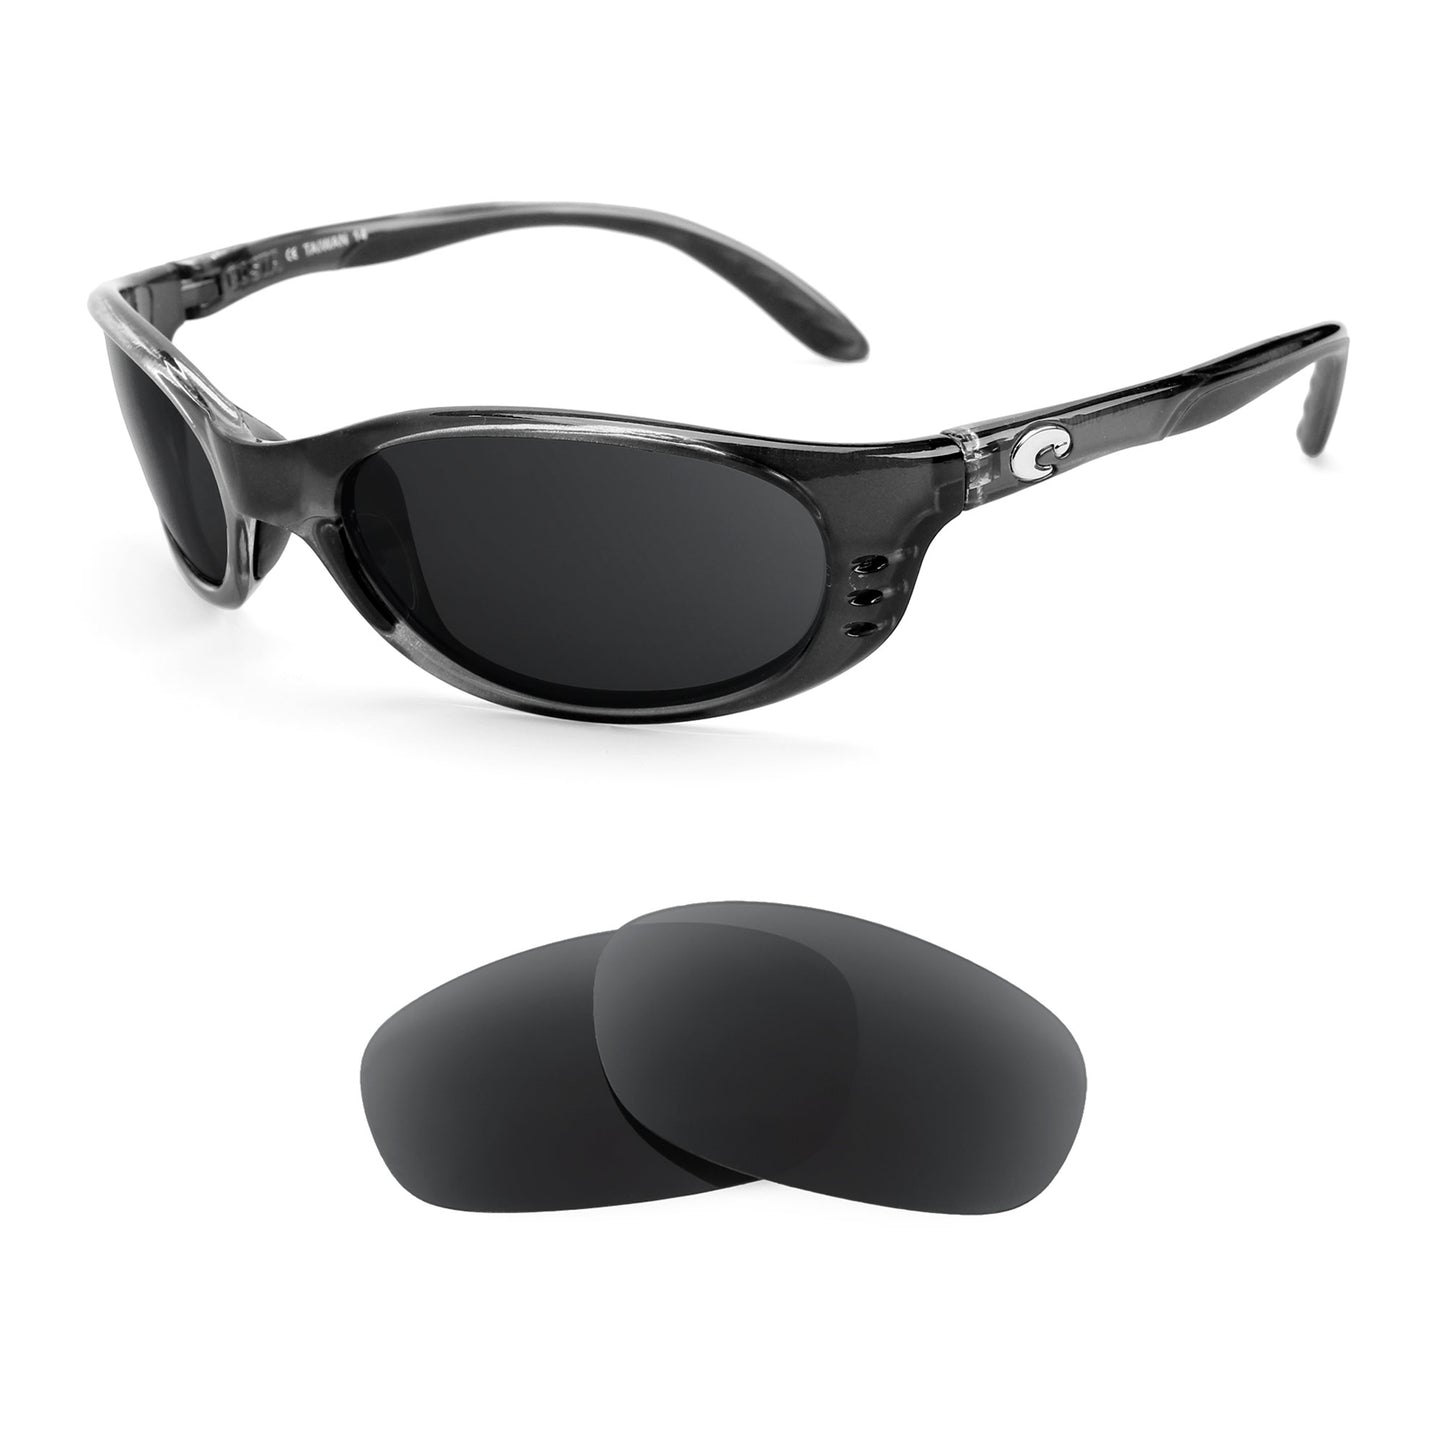 Costa Stringer sunglasses with replacement lenses